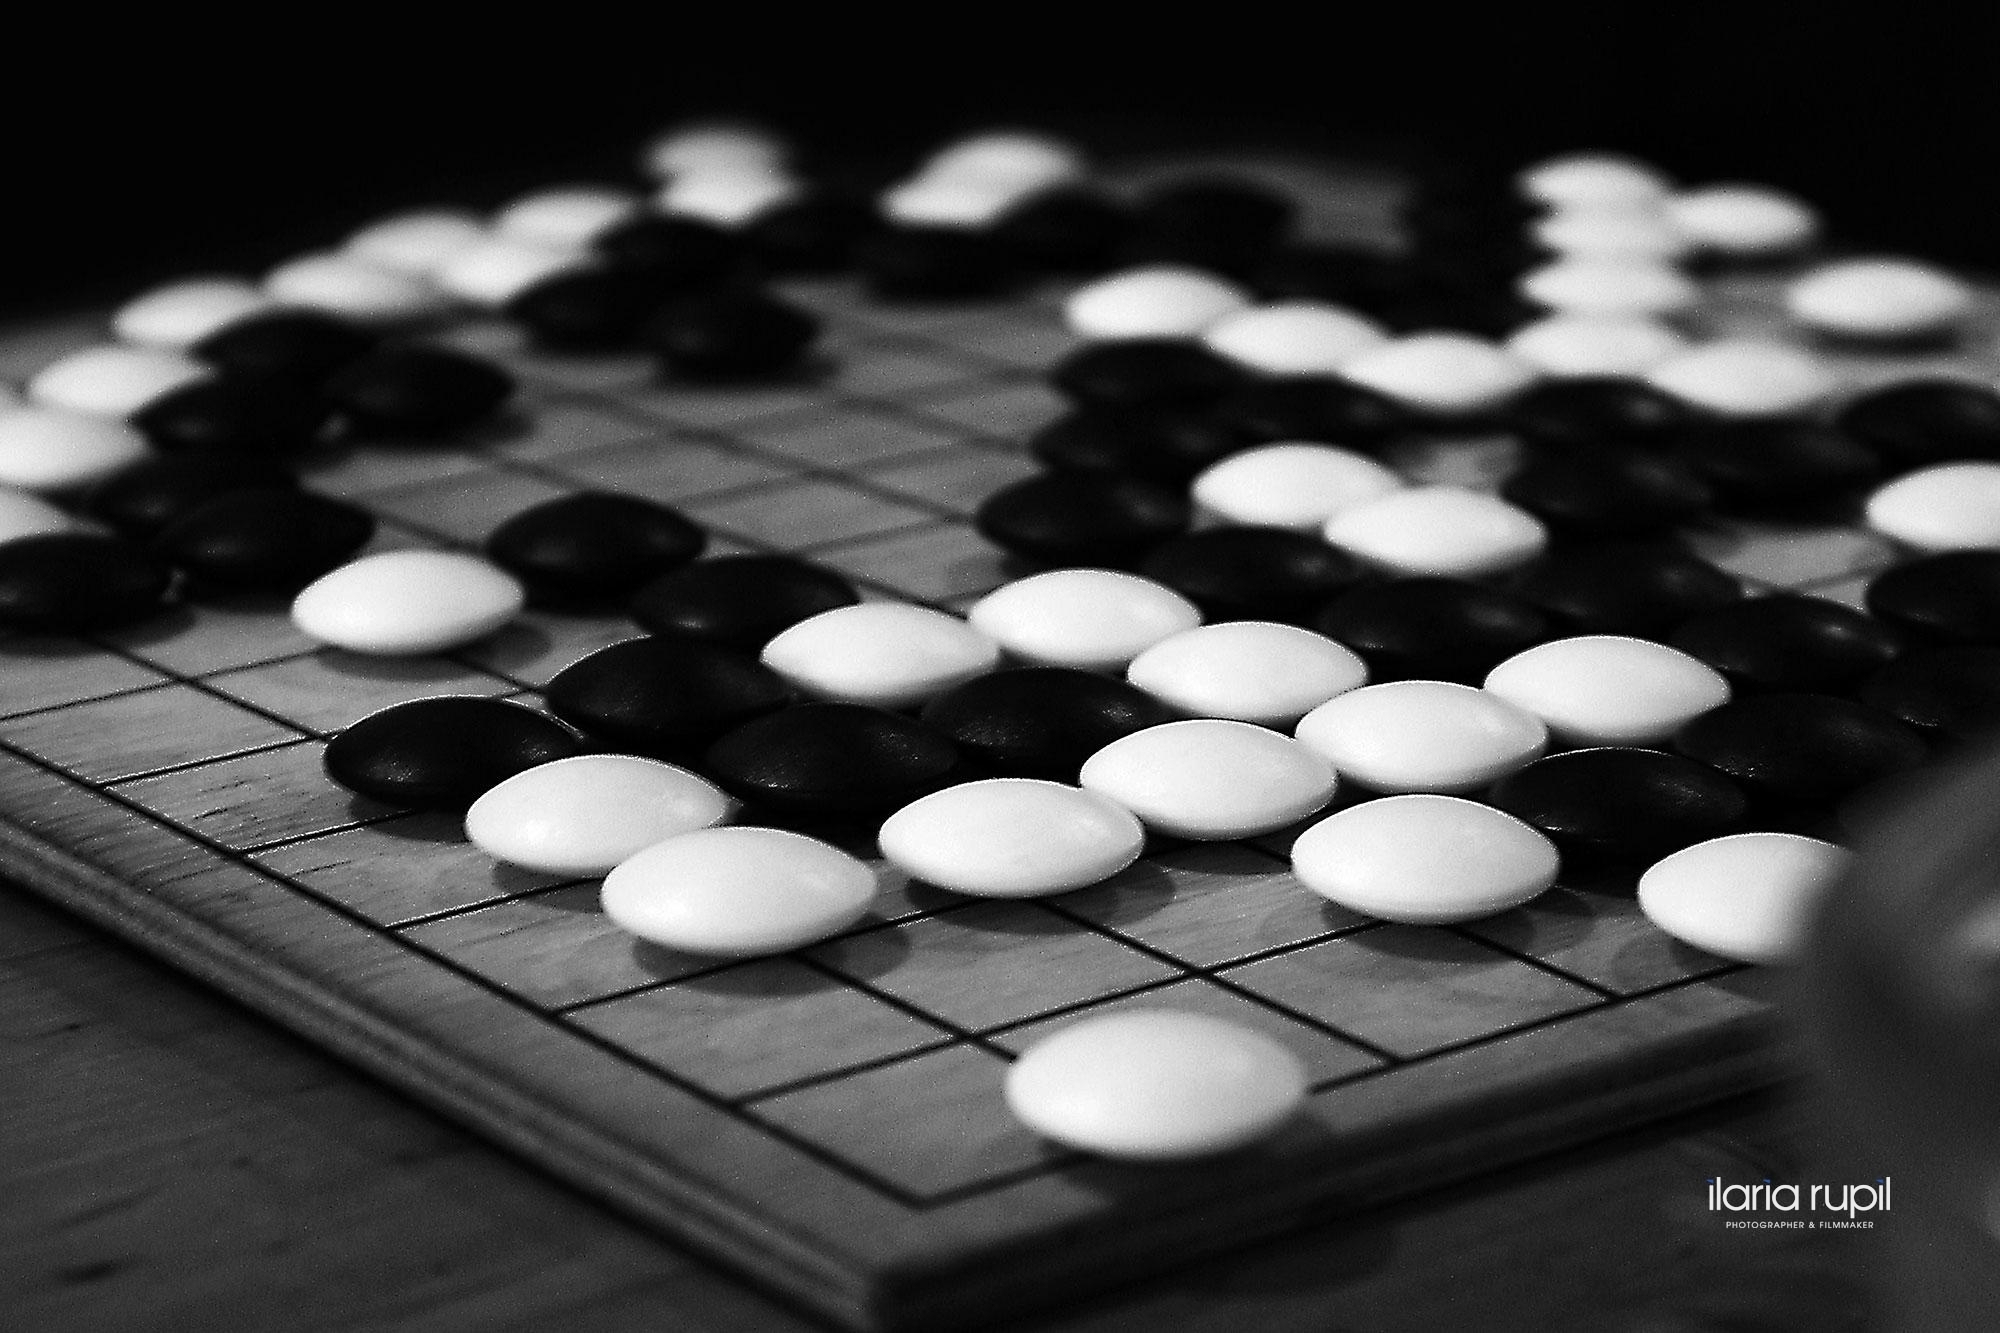 White and black “Stones” compete for the supremacy over a space delimited by the surface of the goban. Go is an ancient Chinese strategy game. It is played a lot in Japan, acquiring its nationality, where it is considered a training for the power of self-control and order.